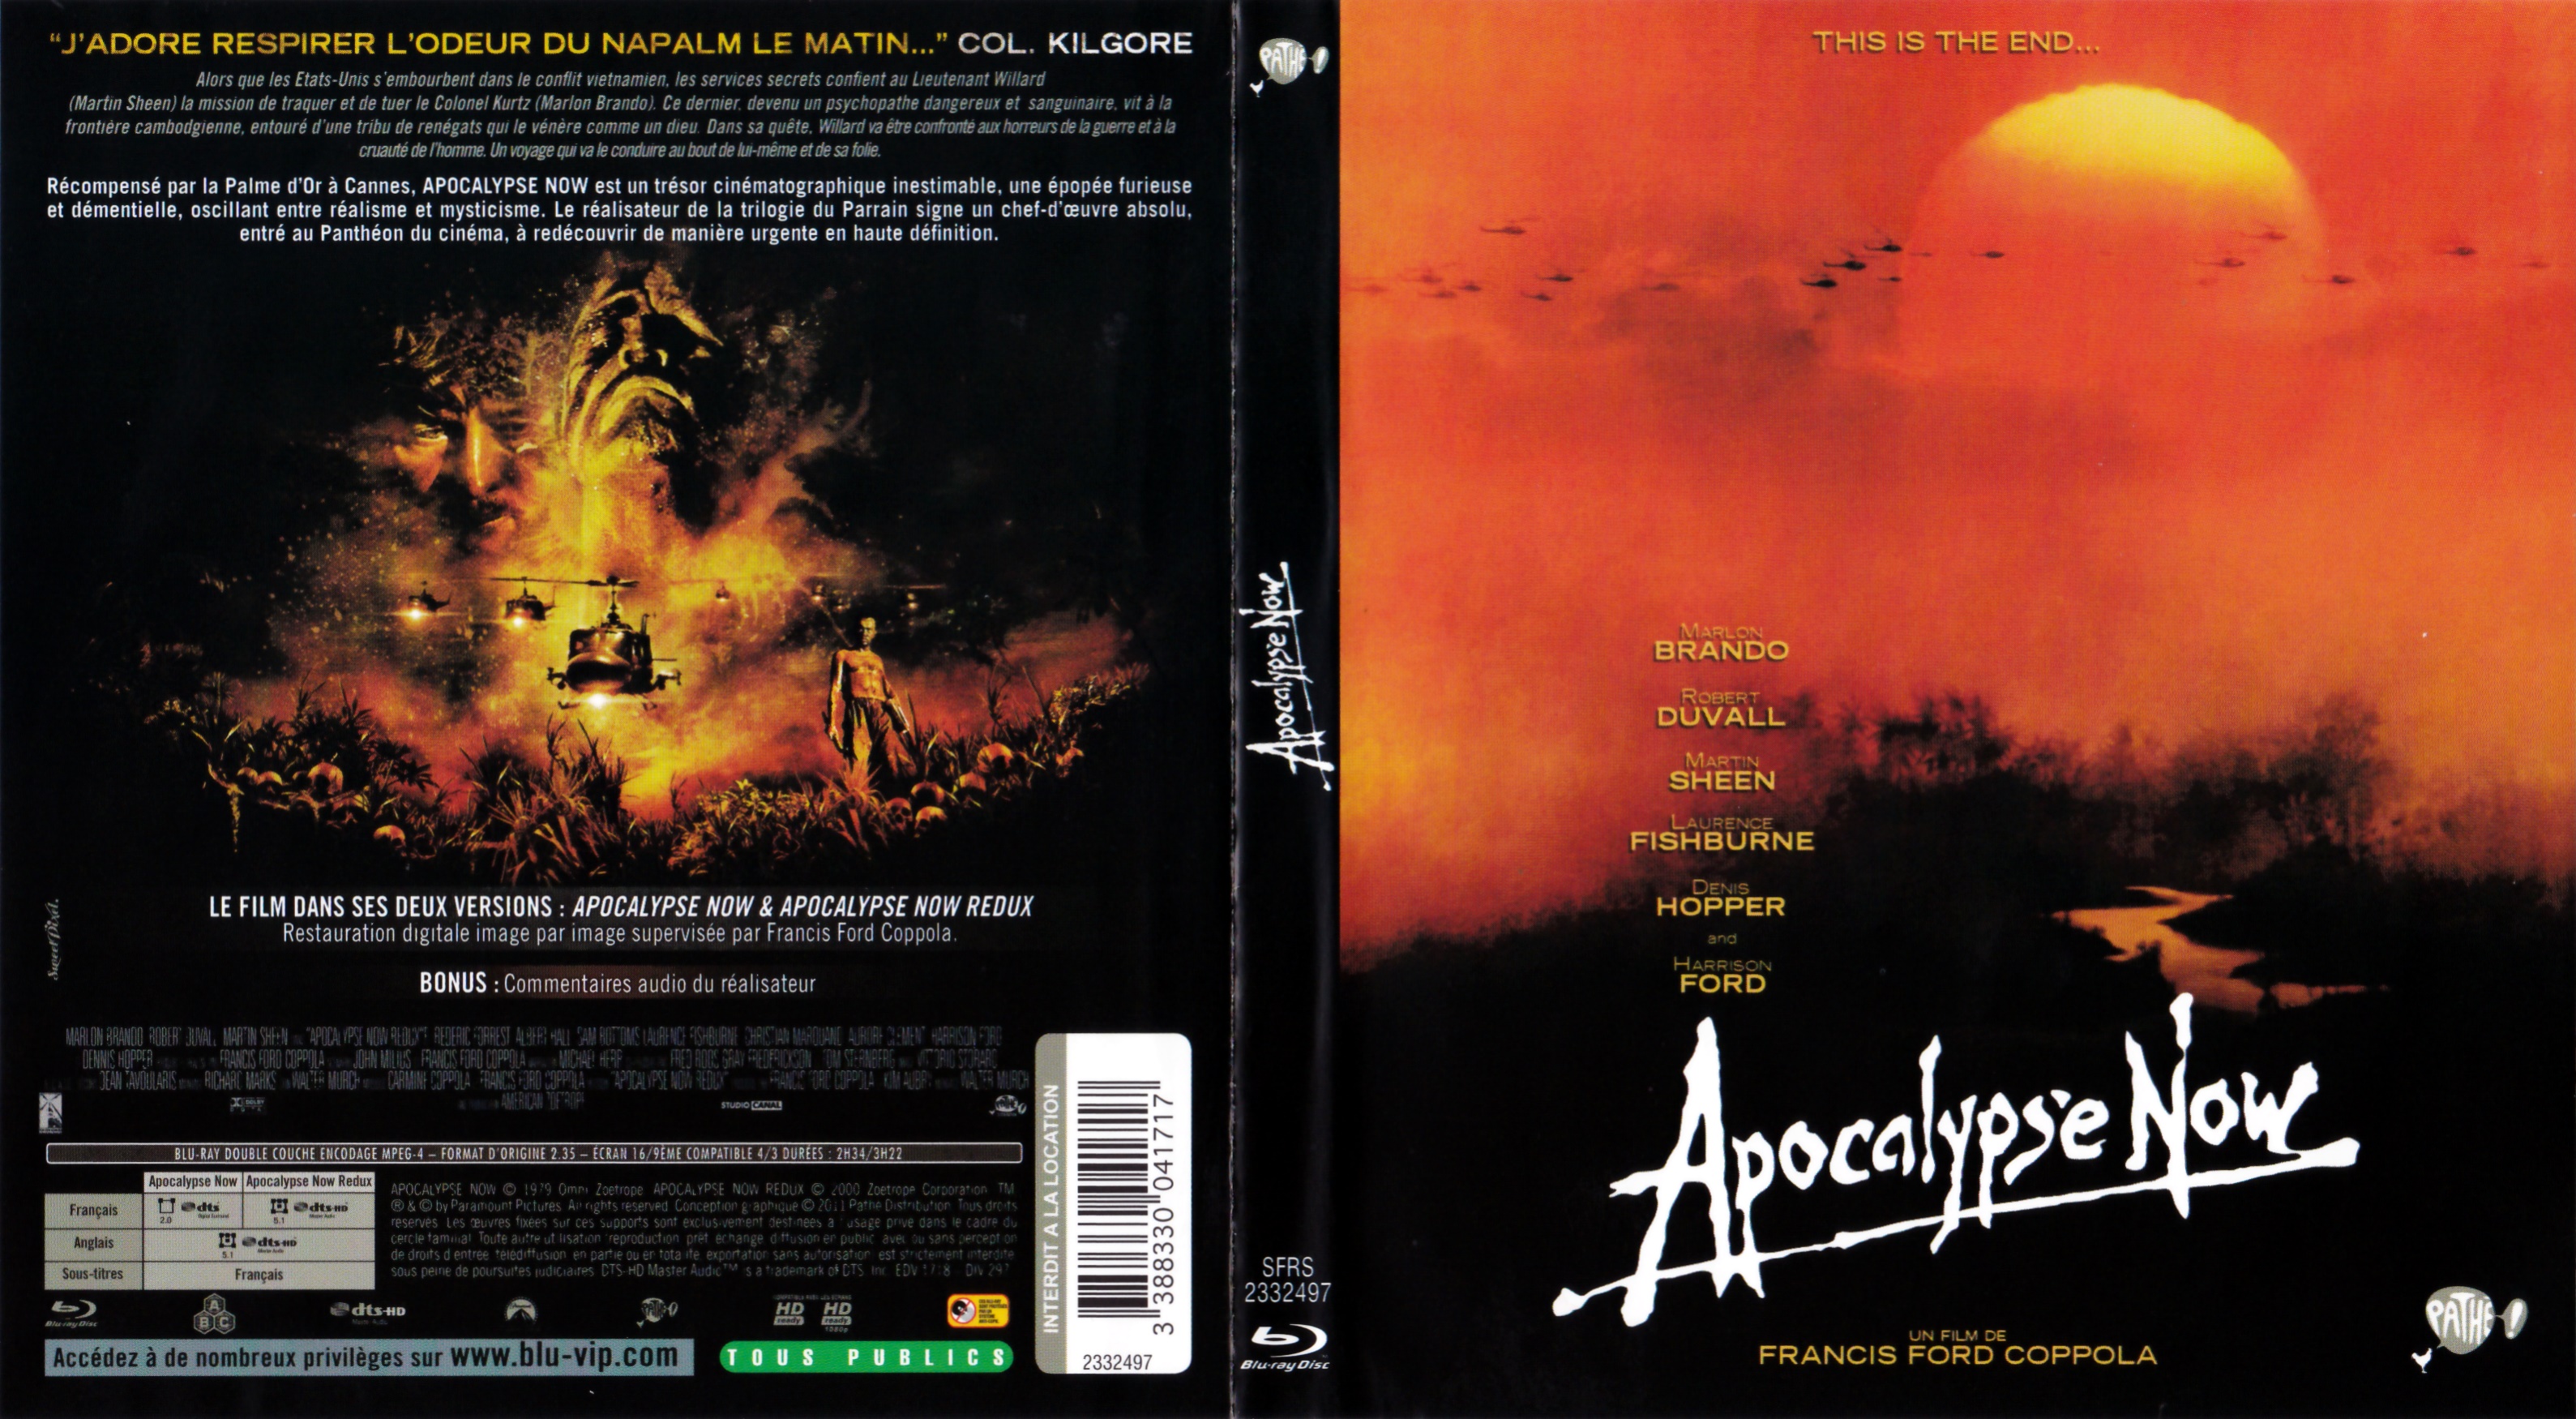 Jaquette DVD Apocalypse now (BLU-RAY) v3